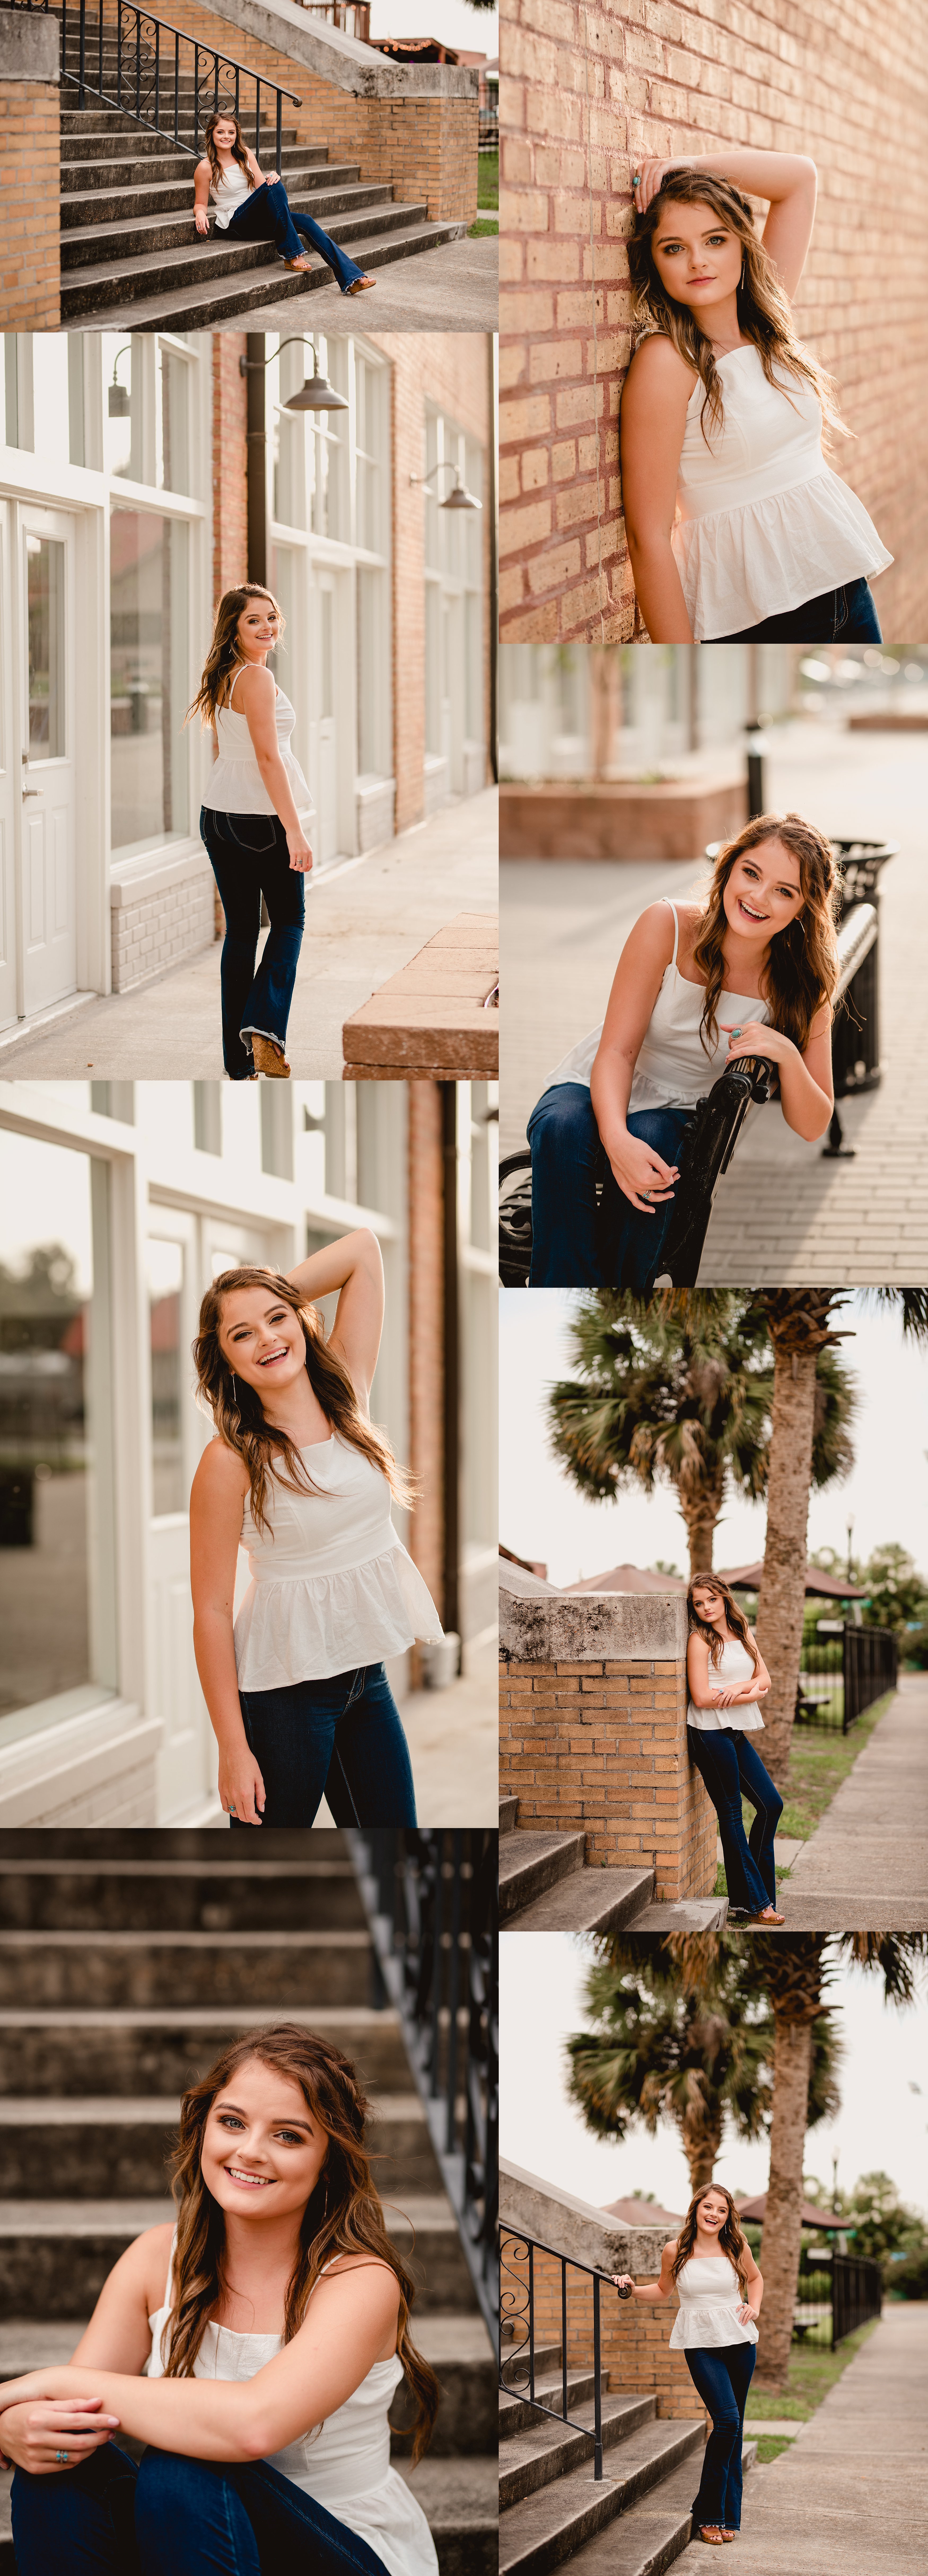 Senior pictures with brick buildings in the downtown area.